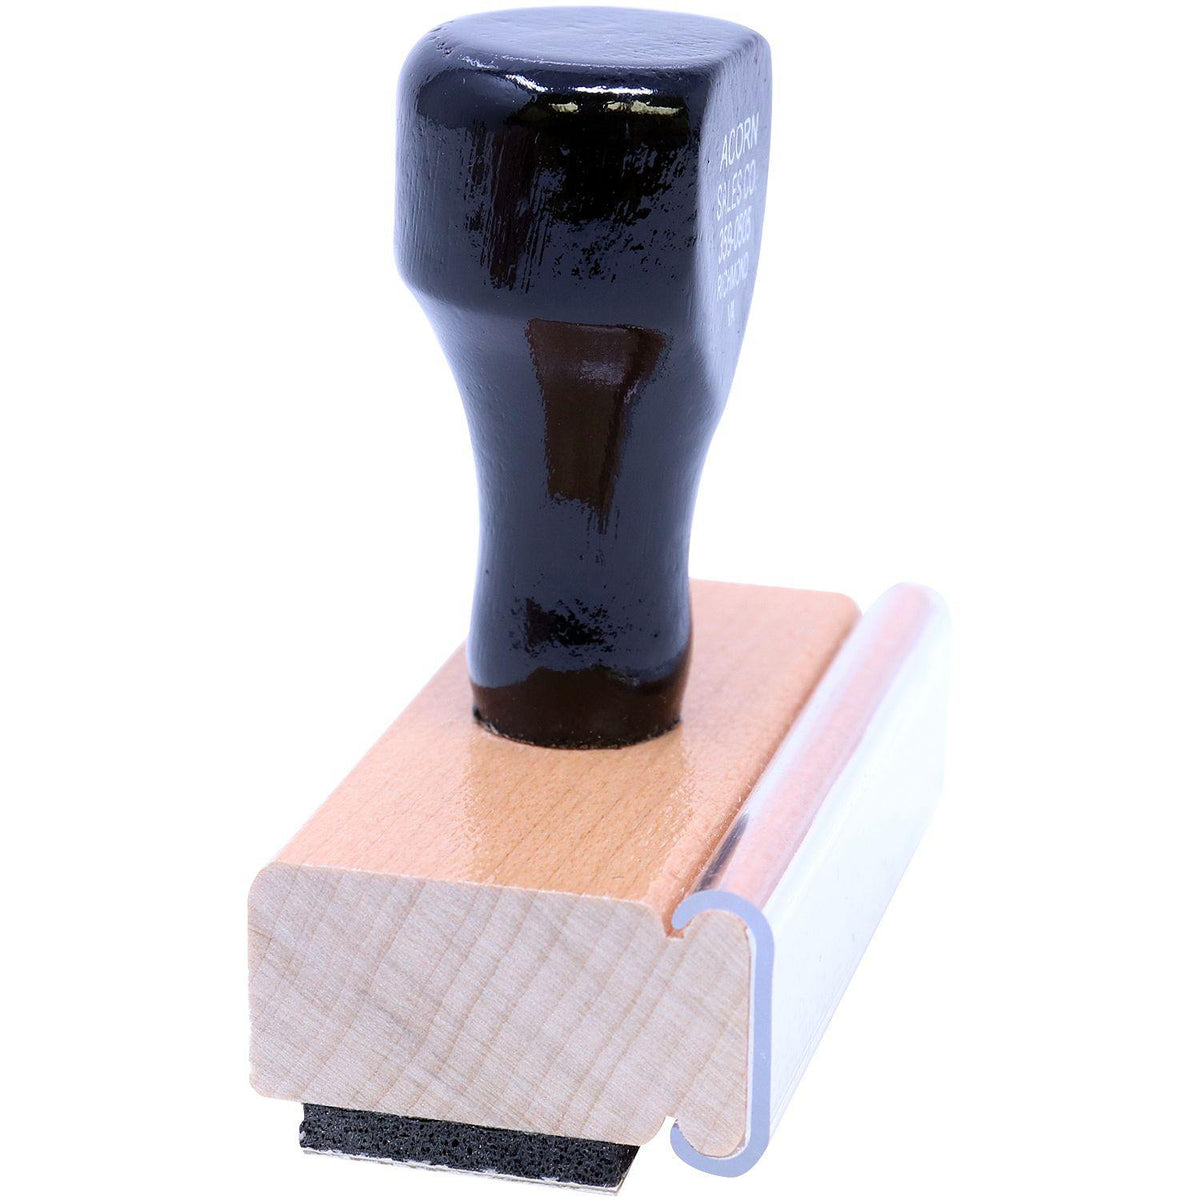 Side View of Large Red Credit Rubber Stamp at an Angle